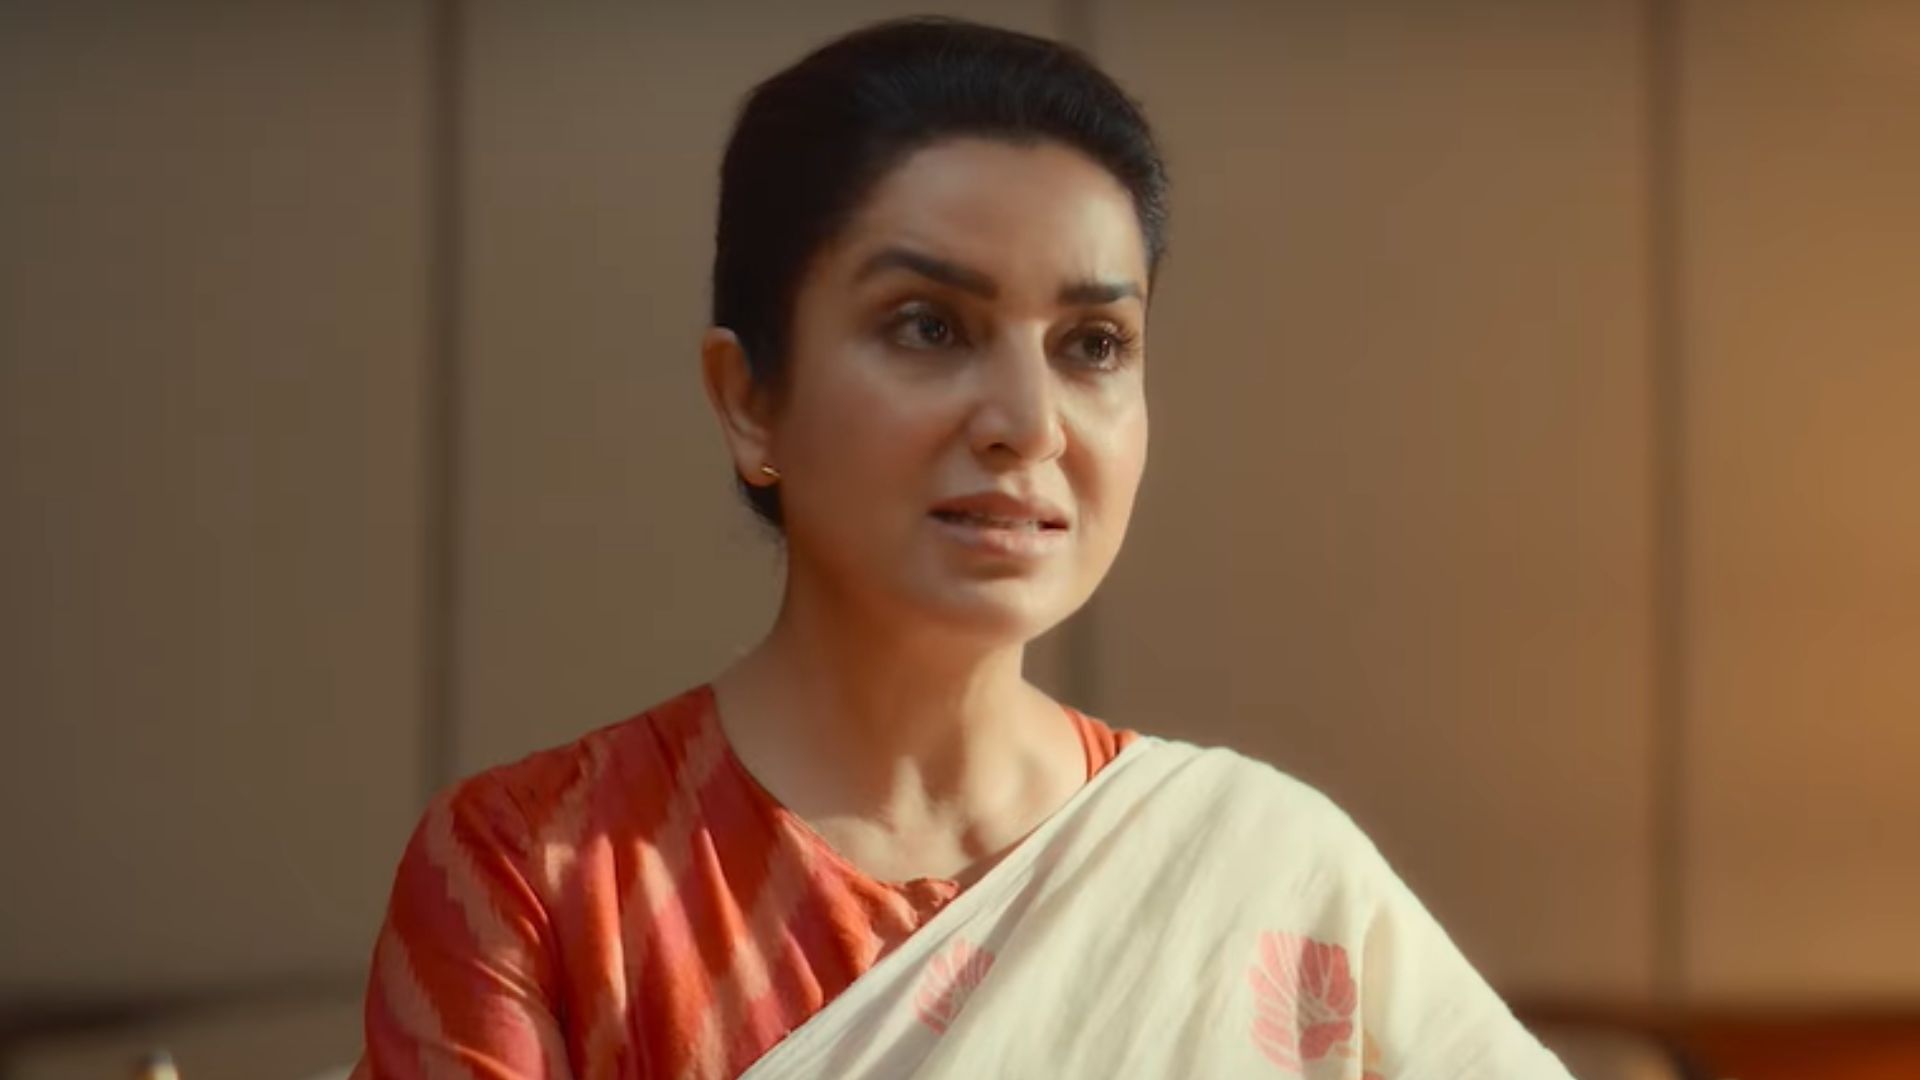 ‘Dahan’ Trailer: Tisca Chopra Headlines Thriller Series About Myths And Supernatural Beings. Spooky!